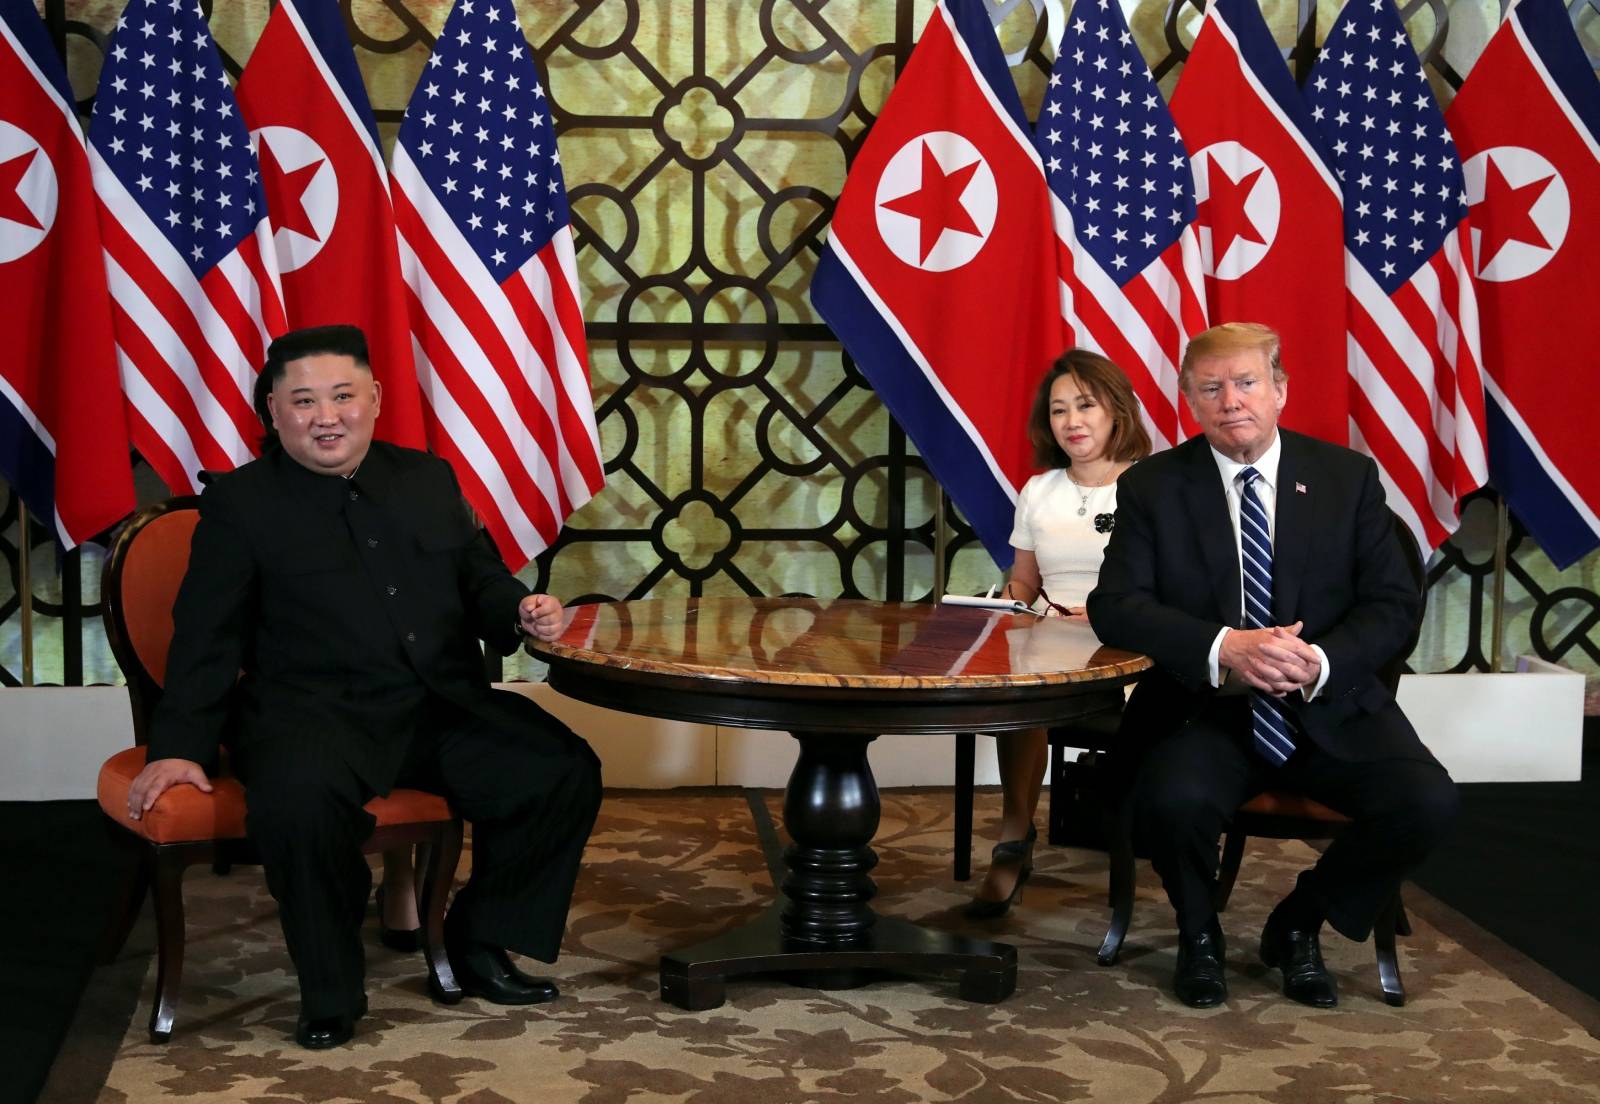 U.S. President Donald Trump and North Korean leader Kim Jong Un react during the one-on-one bilateral meeting at the second North Korea-U.S. summit in Hanoi